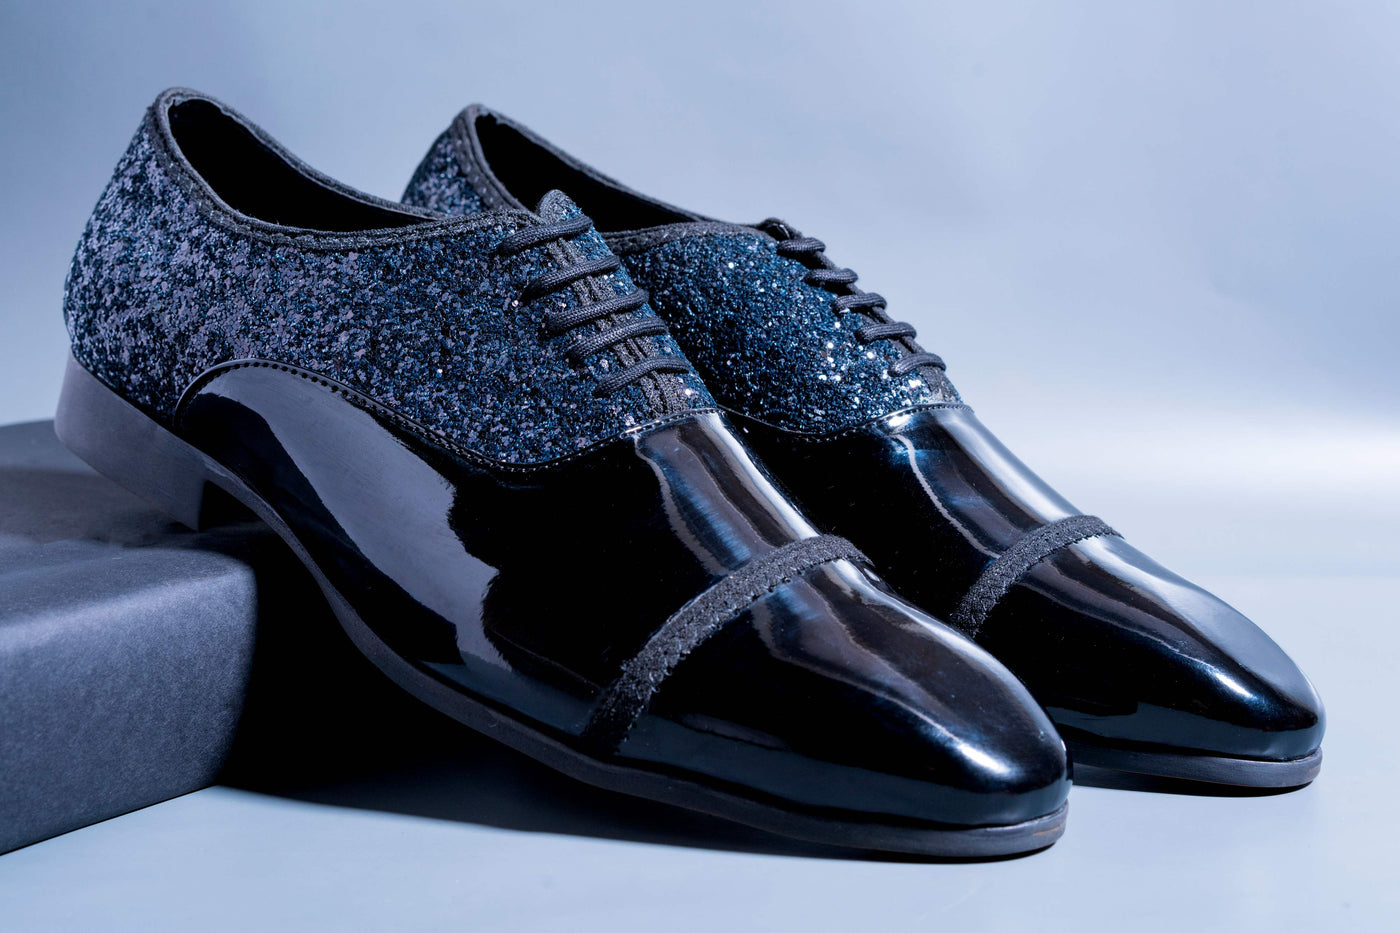 Classy Shiny Party Wear Shoes With Lace-Up For All Season-Unique and Classy